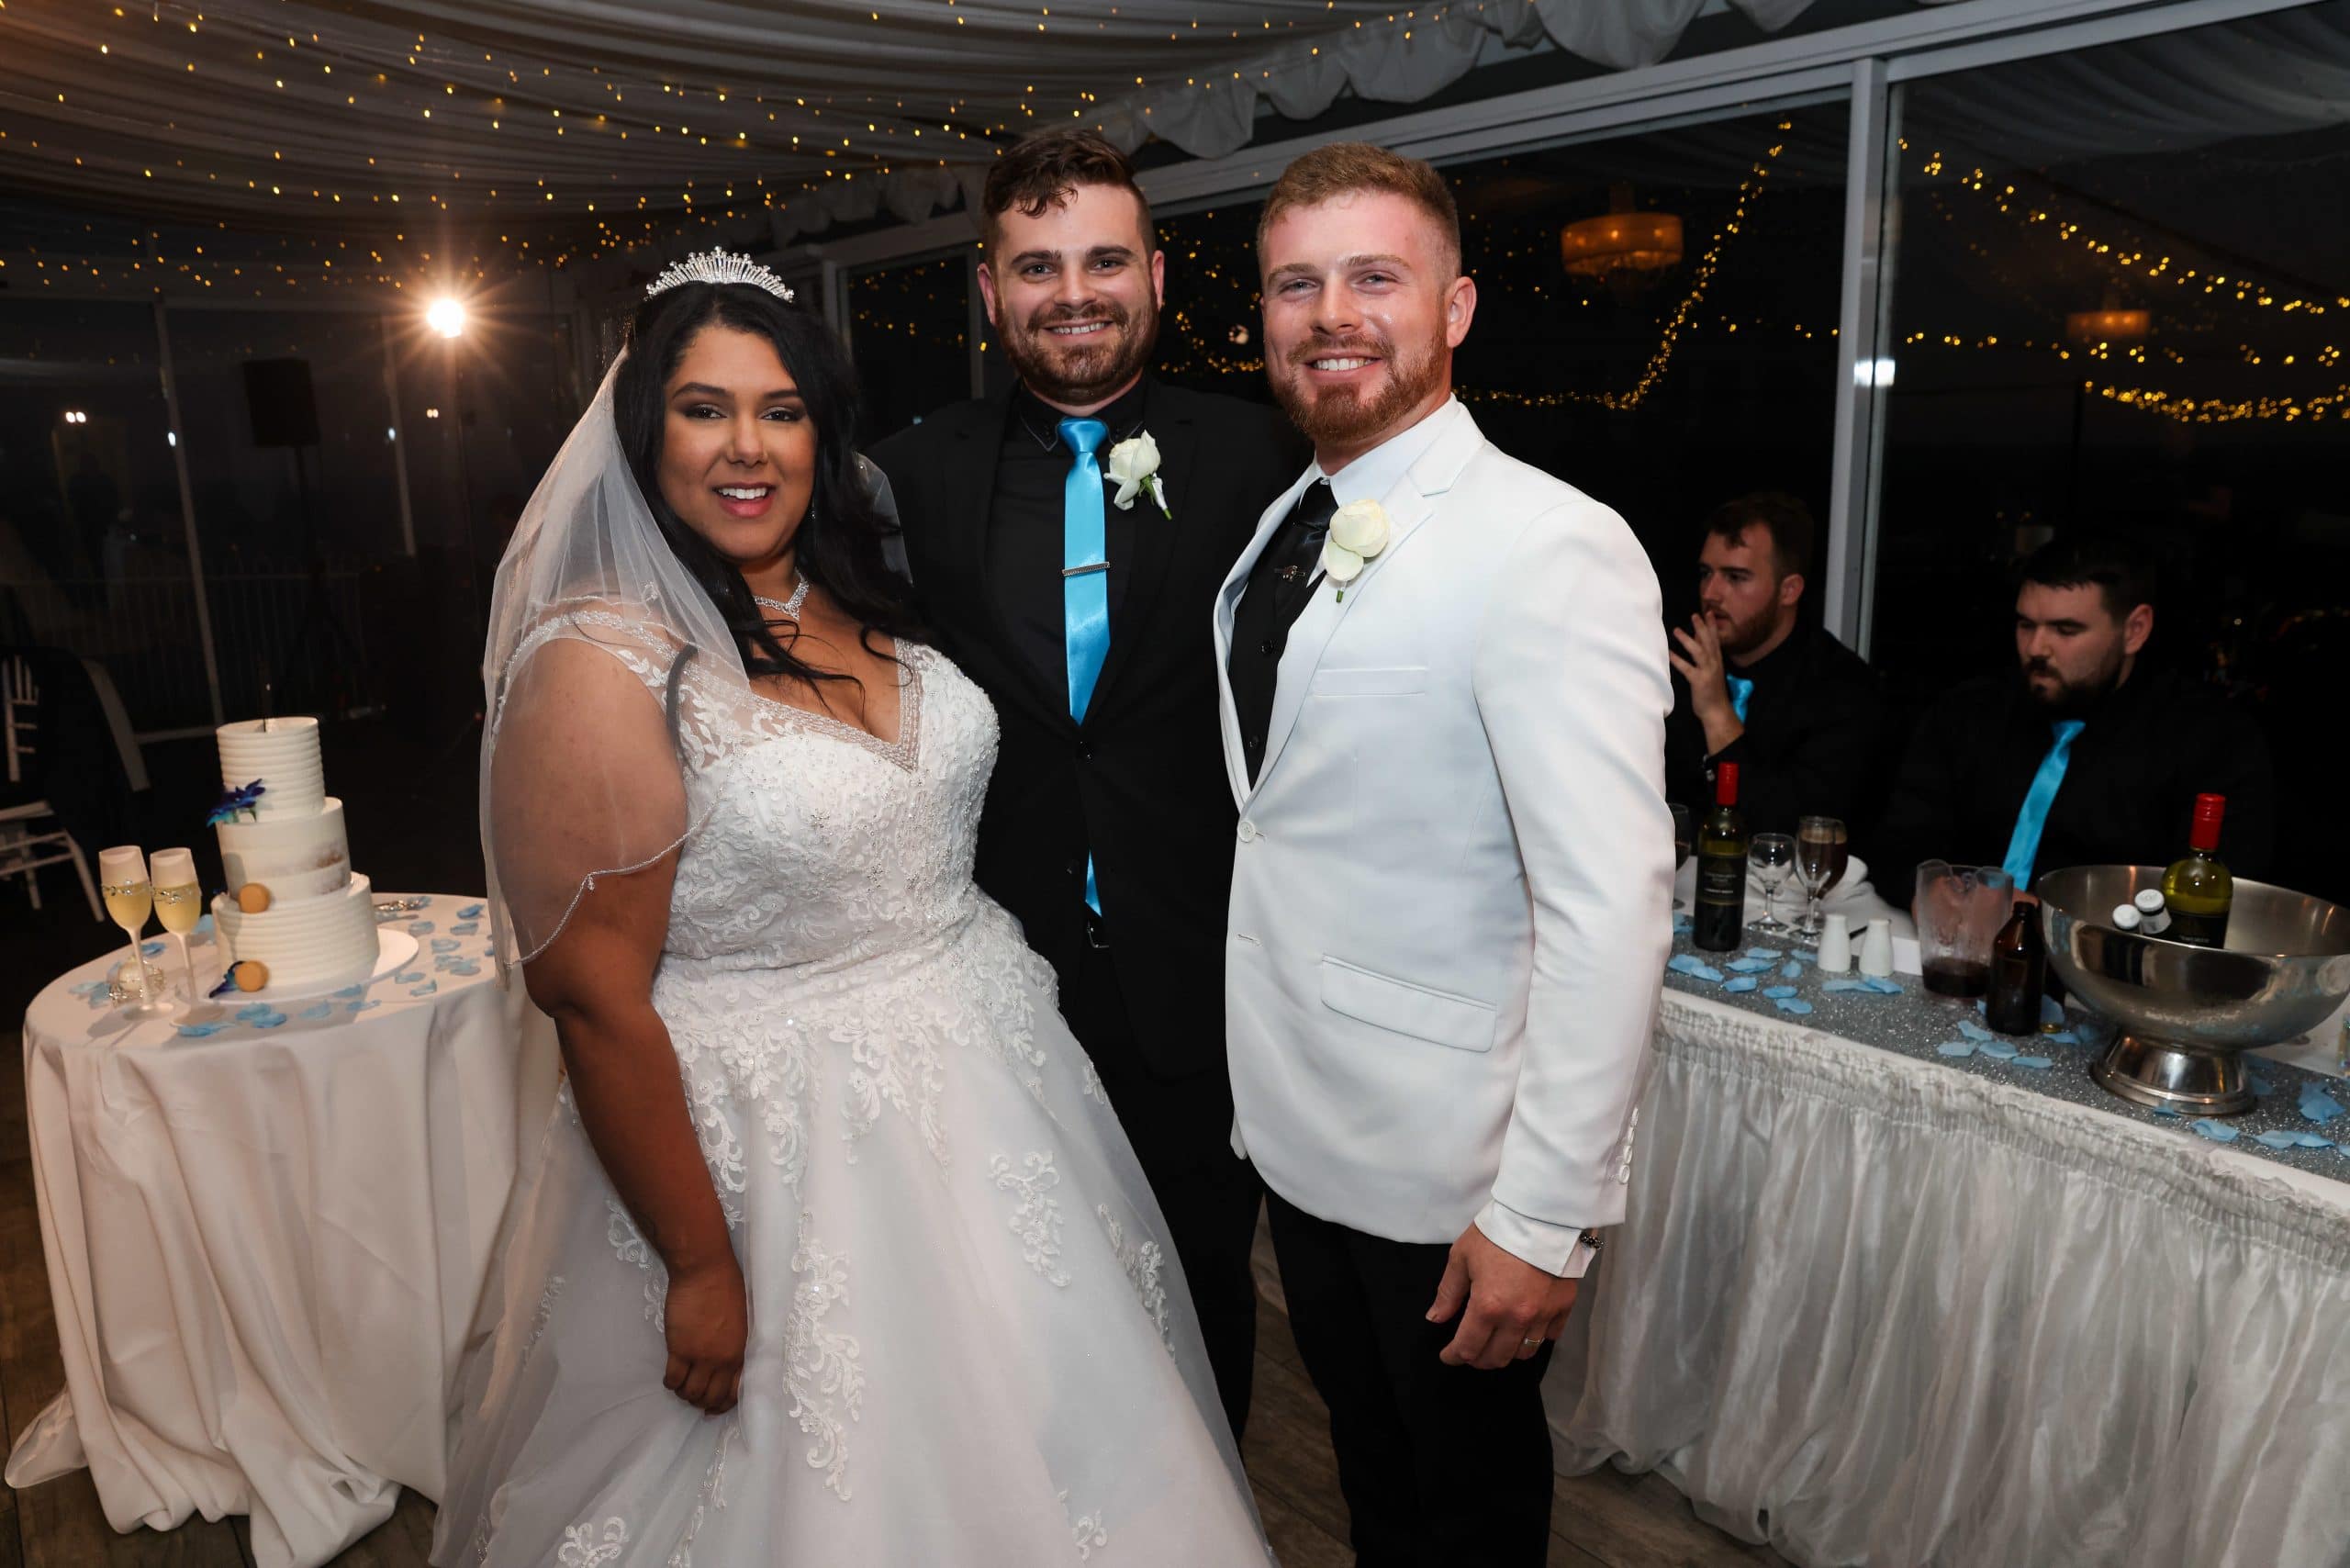 Nathan Cassar with a bride and groom